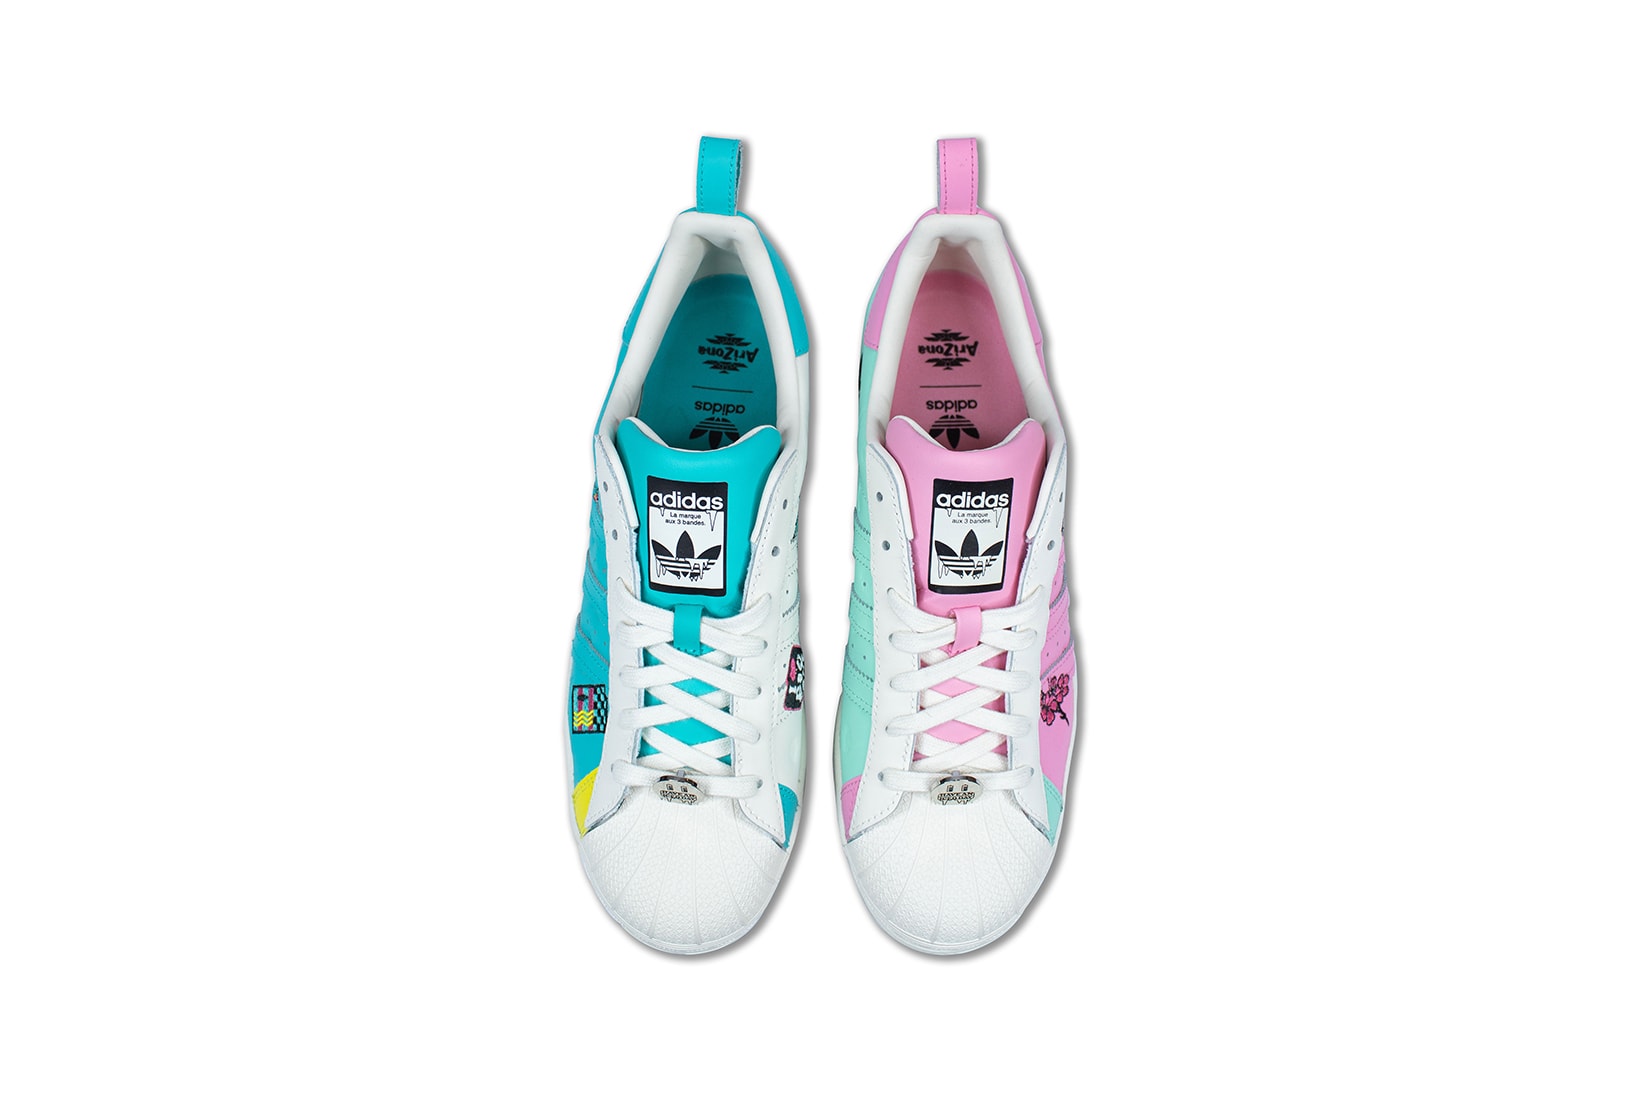 adidas originals arizona iced tea superstar collaboration sneakers big cans aerial birds eye view insole laces white blue teal pink insole